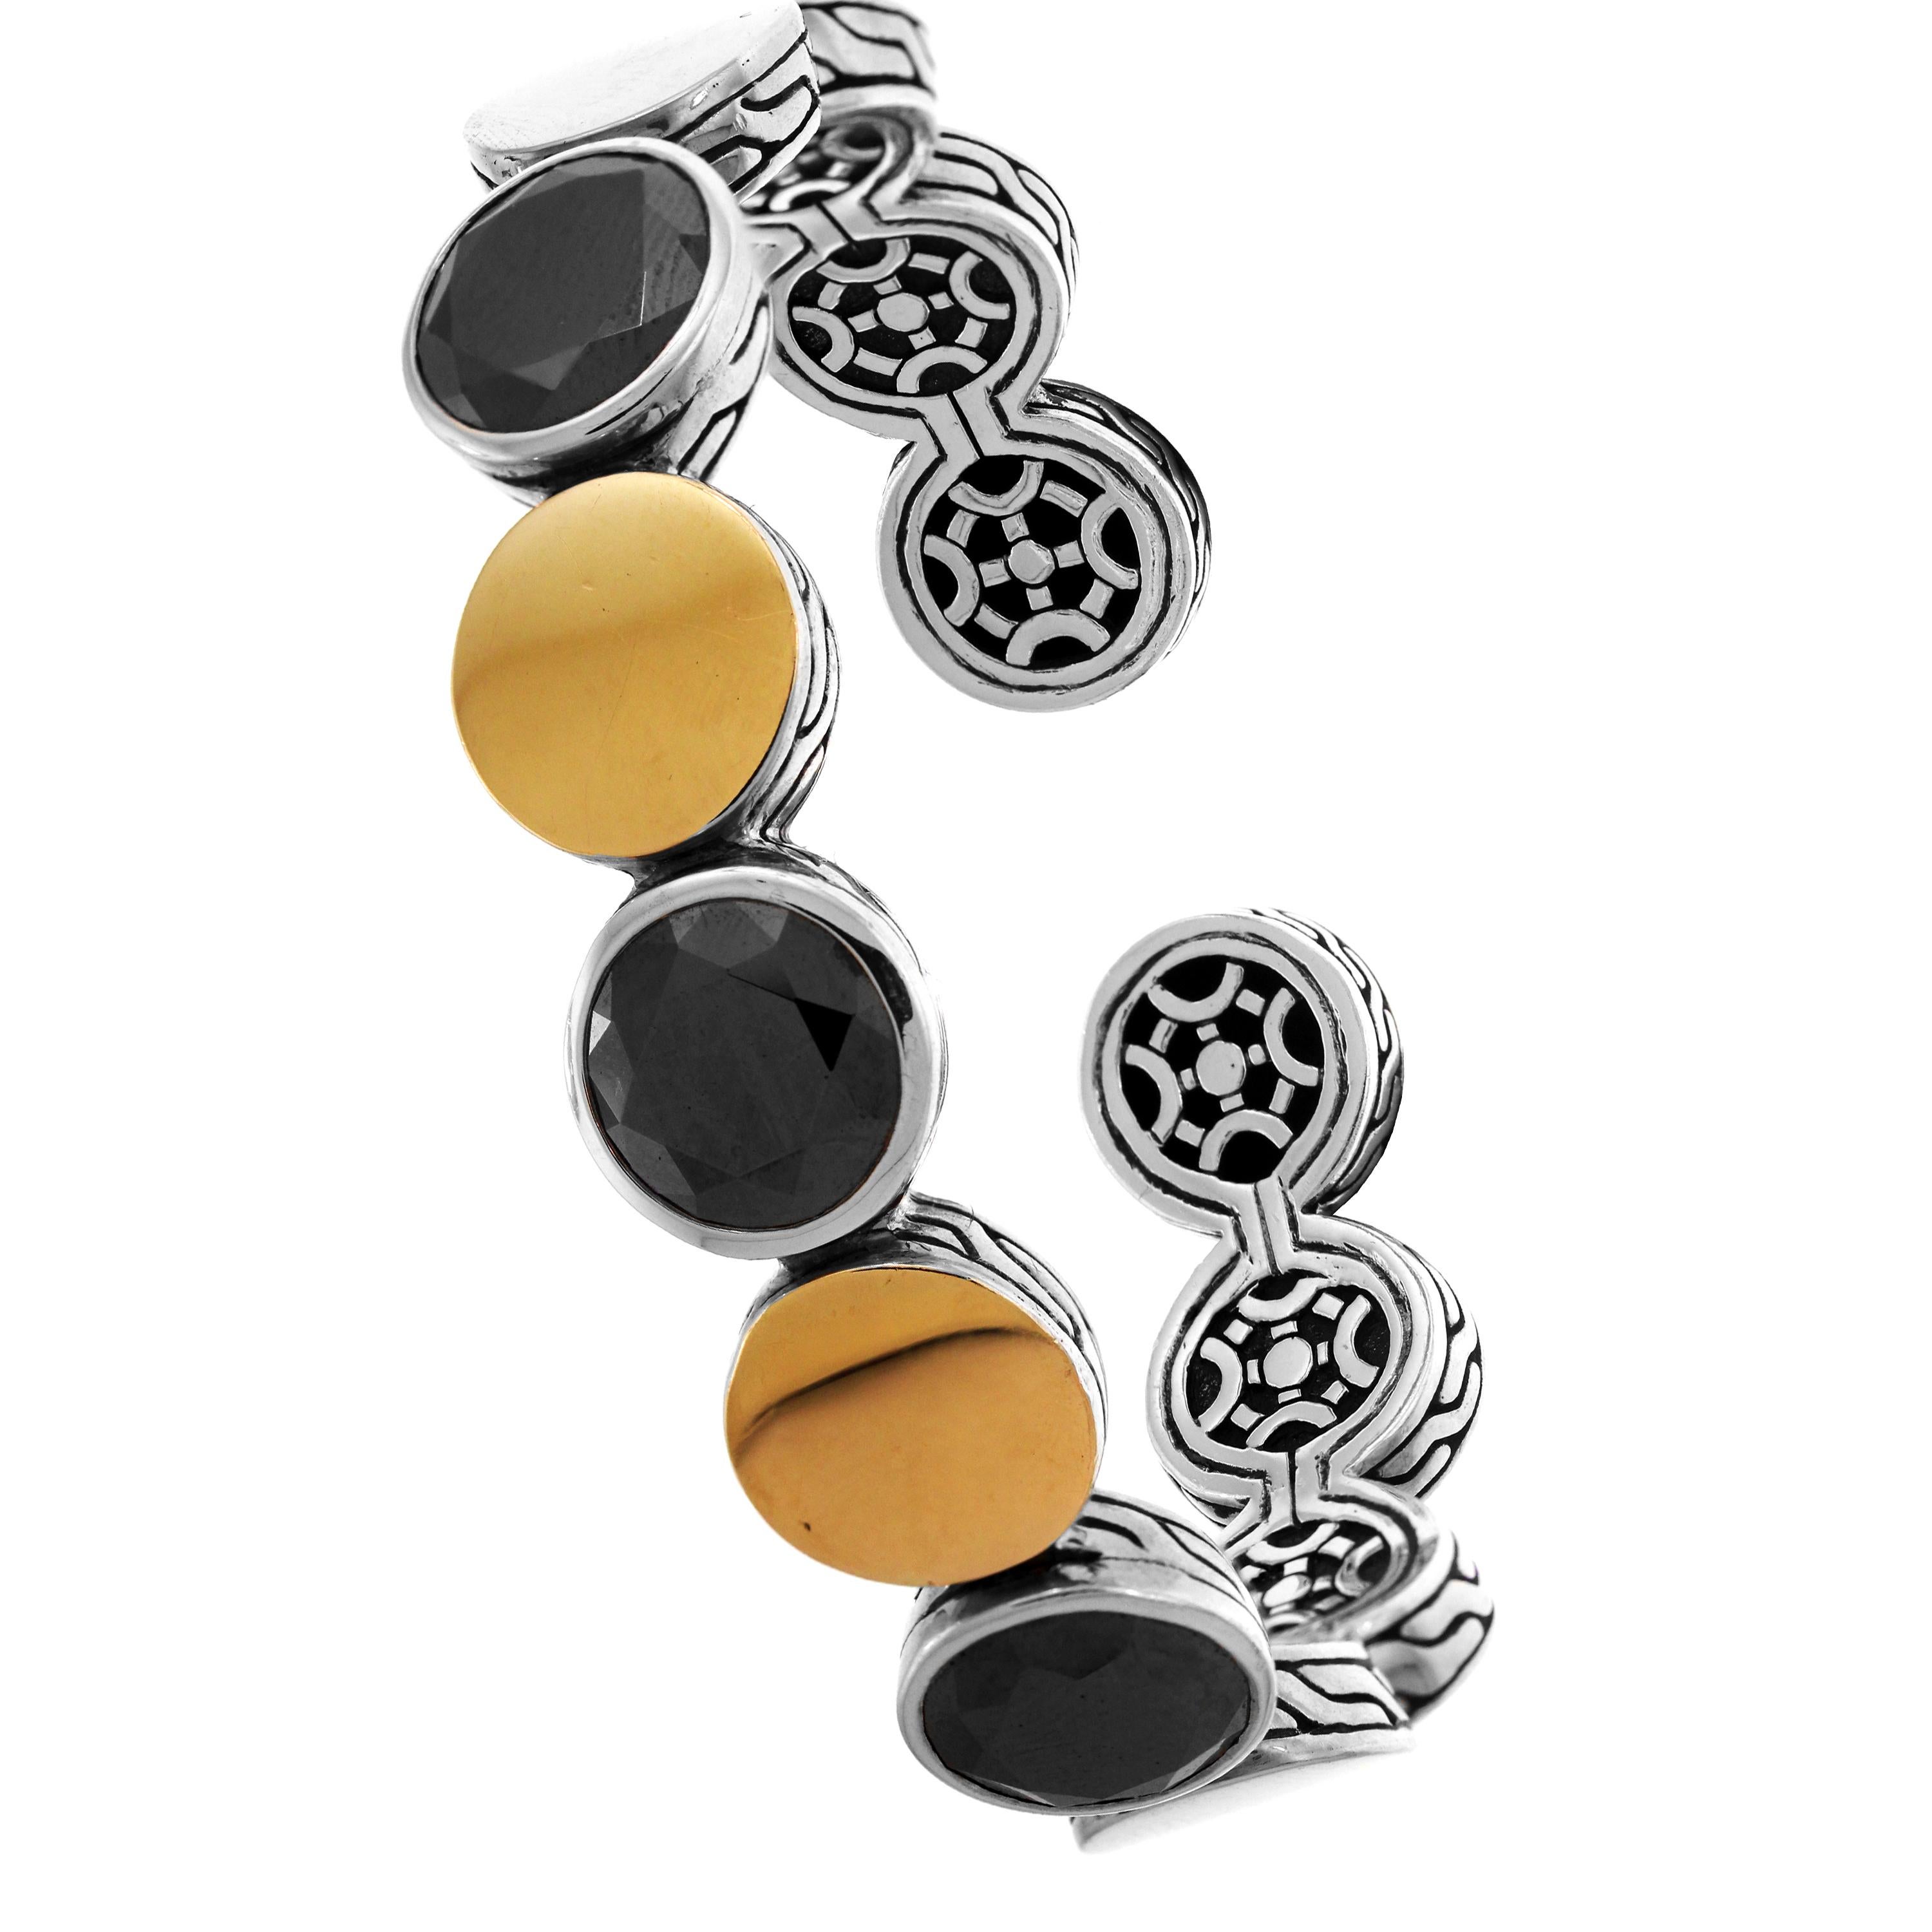 Women's John Hardy Sterling Silver and Yellow Gold Black Spinel Cuff Bracelet Set